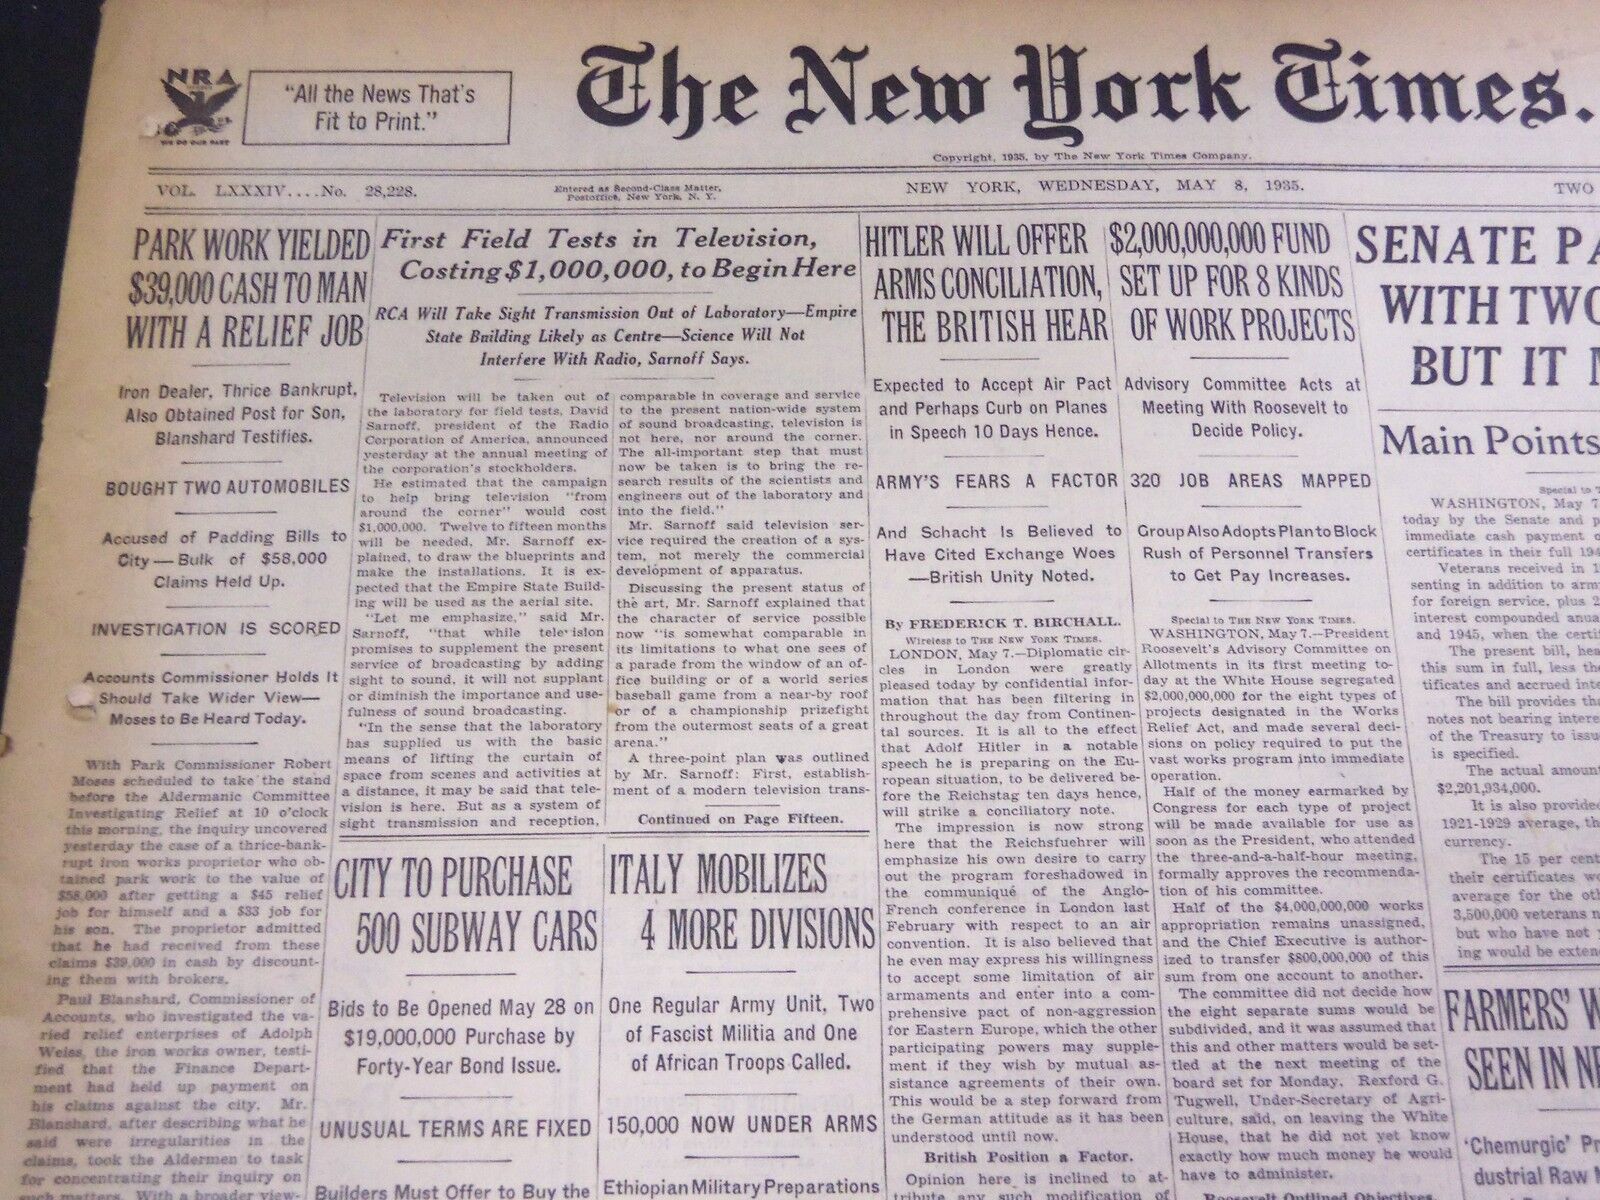 1935 MAY 8 NEW YORK TIMES - FIRST FIELD TESTS IN TELEVISION BEGIN HERE - NT 4879